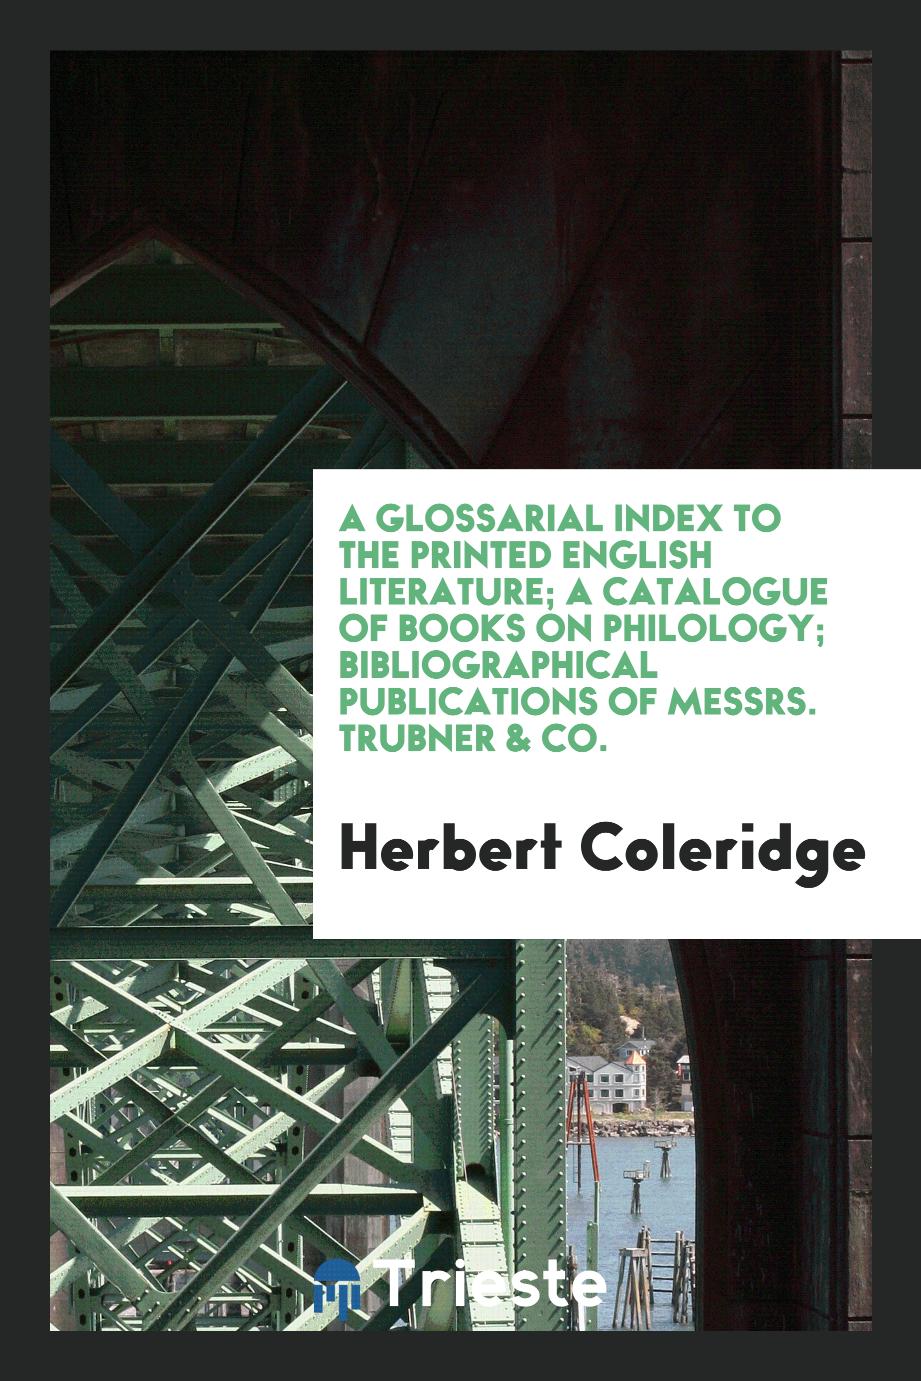 A glossarial index to the printed English literature; A catalogue of books on philology; Bibliographical publications of Messrs. Trubner & Co.